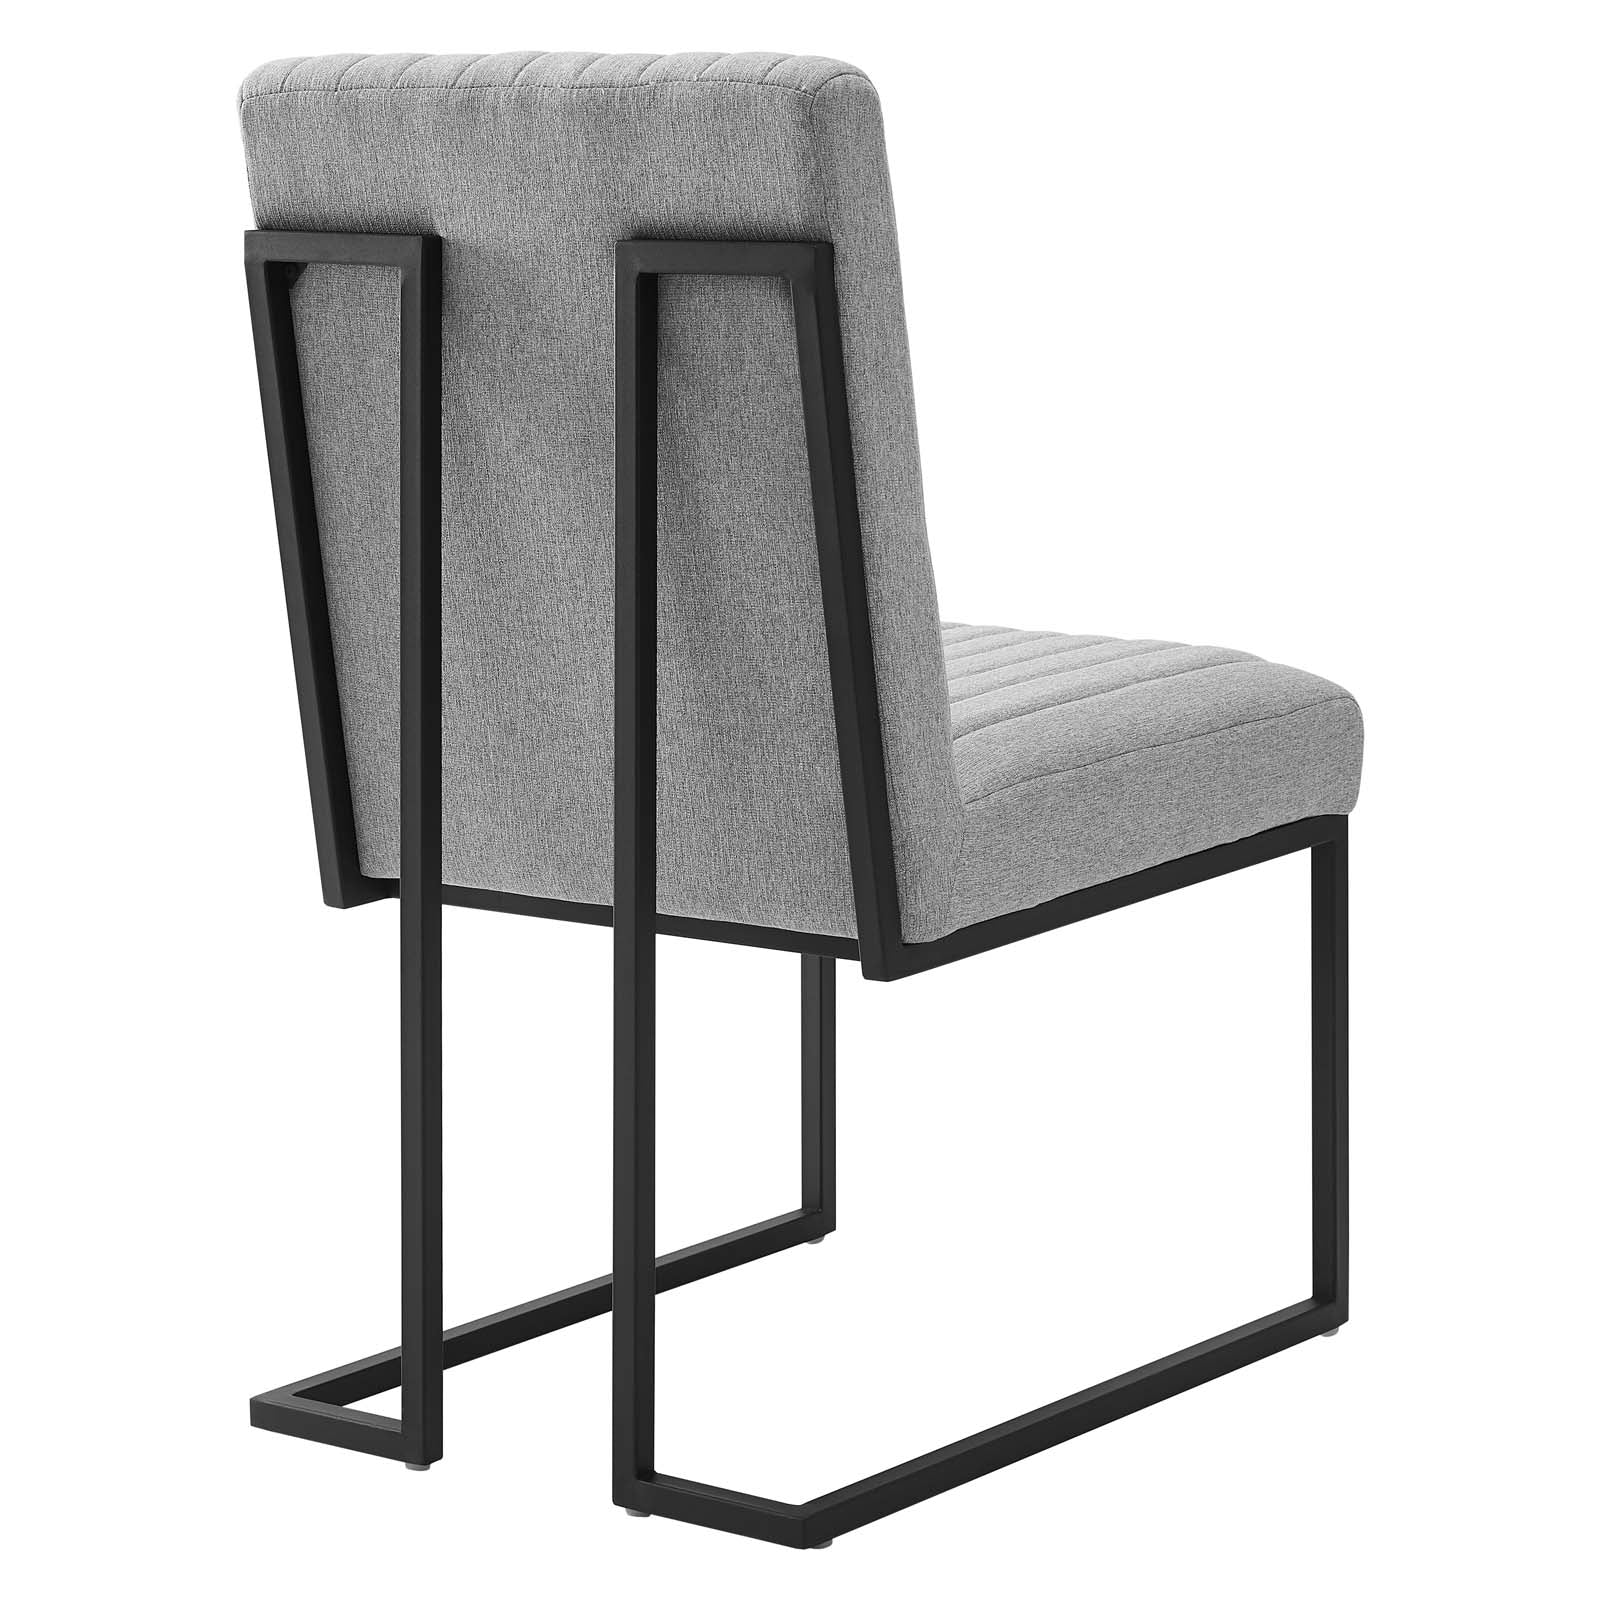 Modway Dining Chairs - Indulge Channel Tufted Fabric Dining Chair Light Gray